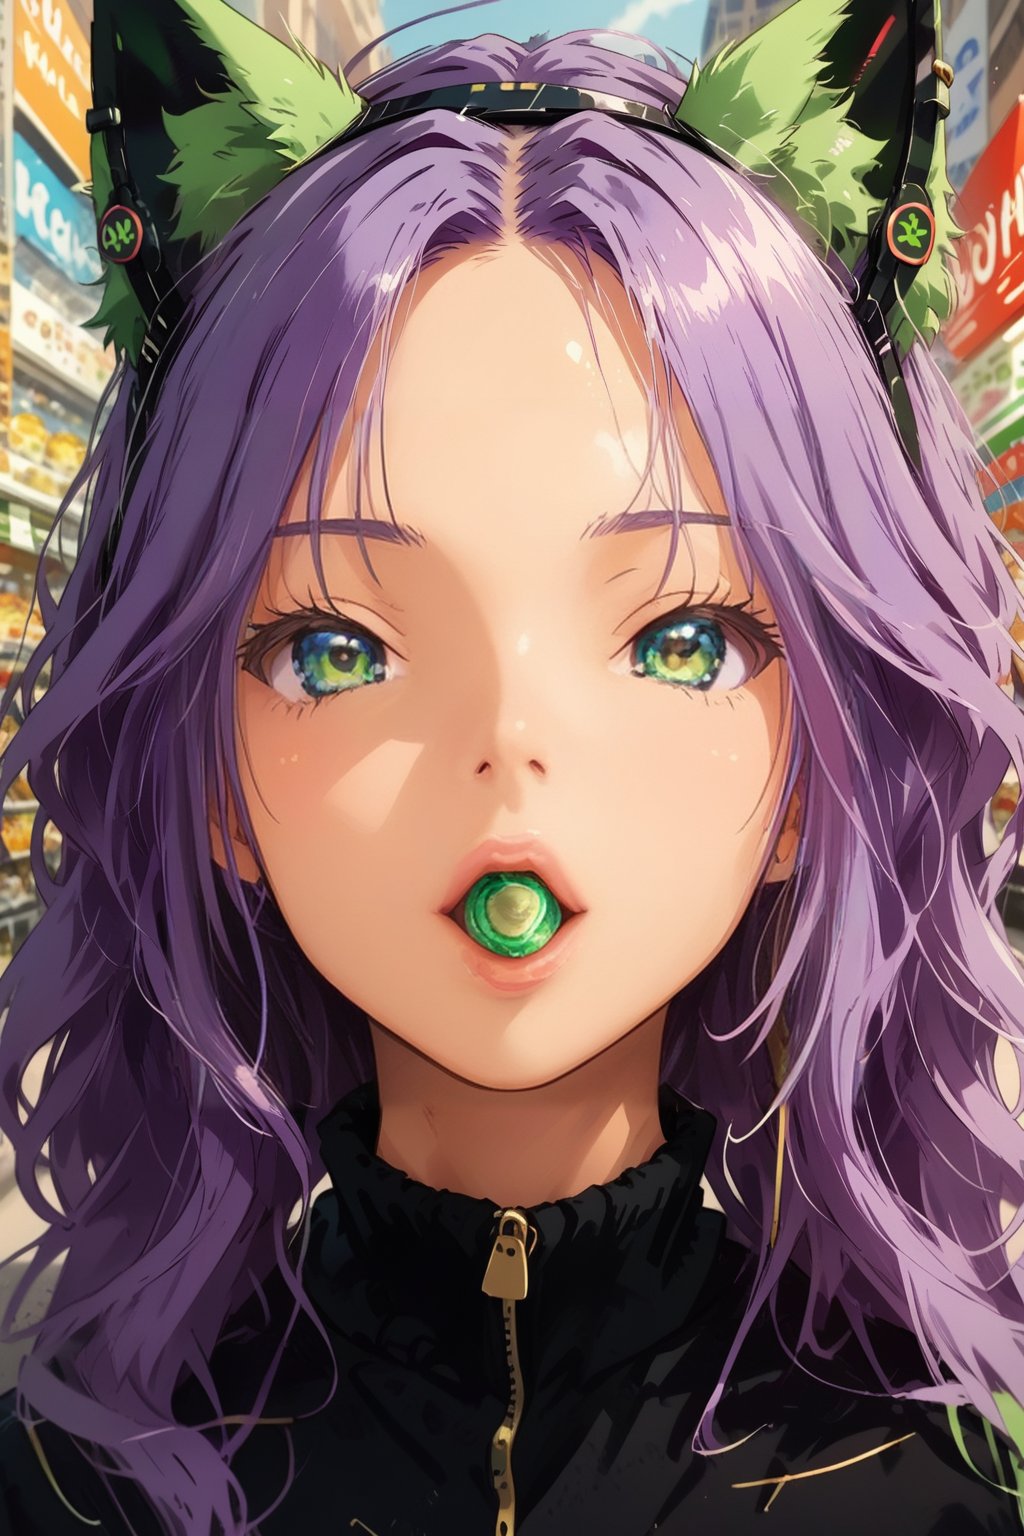 A purple-haired woman with green cat ears and white eyes is shopping confidently and happily on the streets of an American city, wearing headphones and holding a lollipop in her mouth